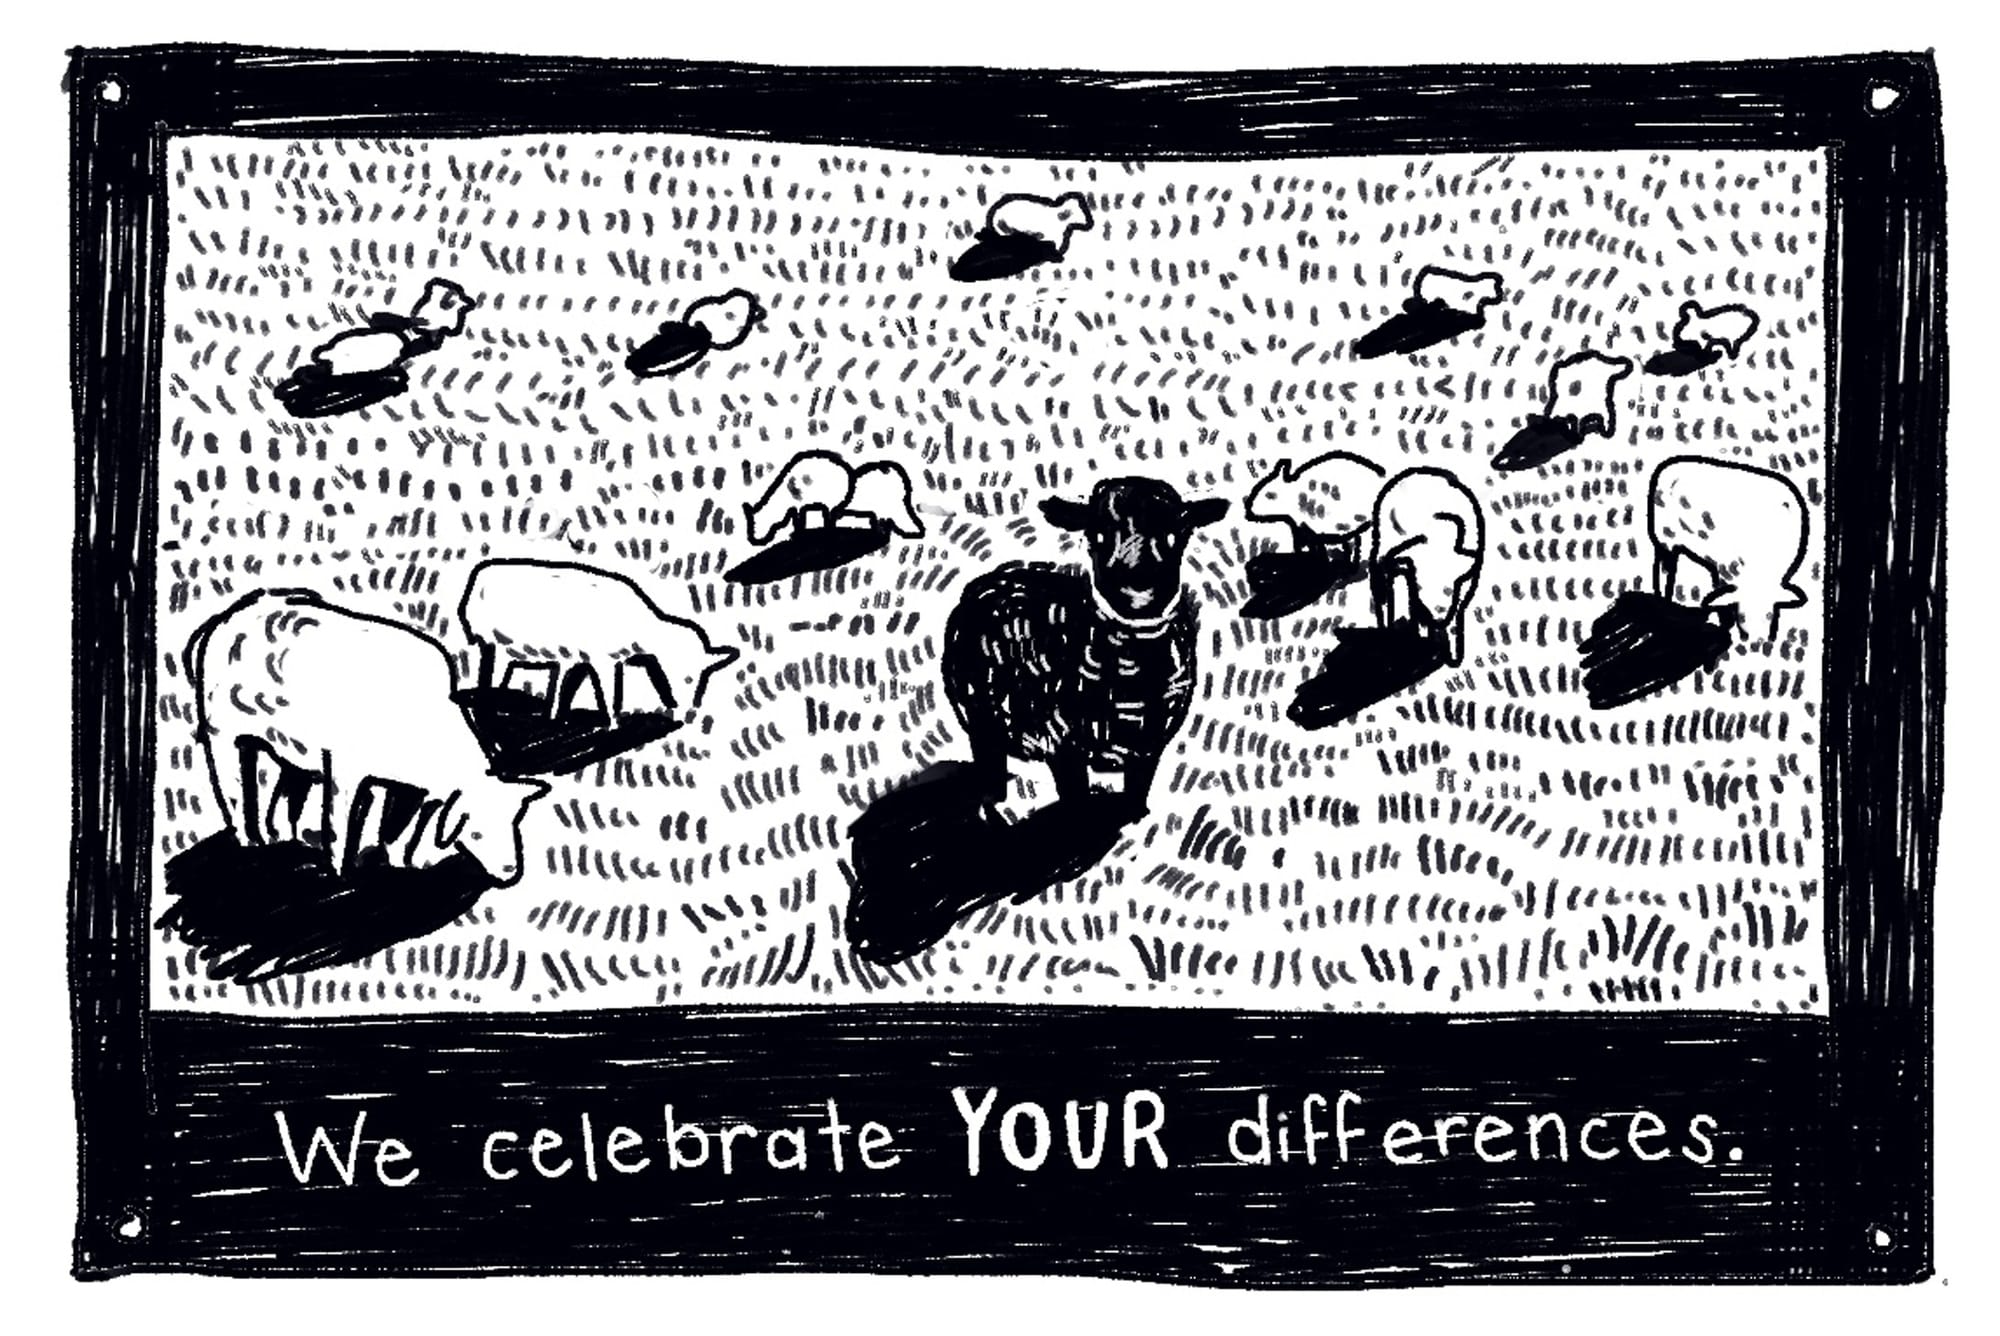 Panel illustration: a black sheep stands out amongst a crowd of white sheep. Text: We celebrate YOUR differences. 